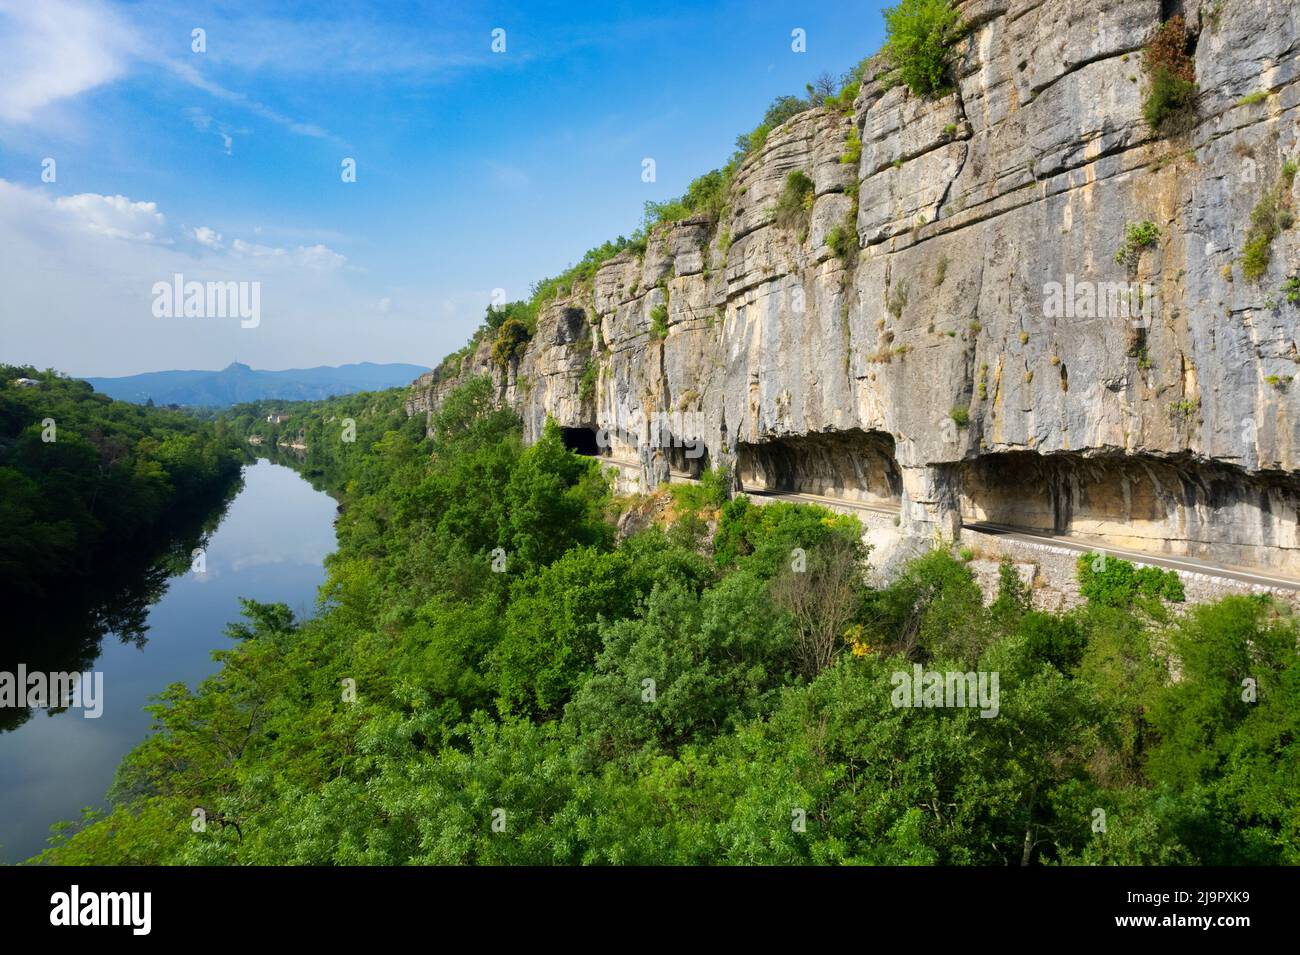 Famous road with arch in the rock called 'defile de Ruoms' et Ruoms, France, Europe Stock Photo